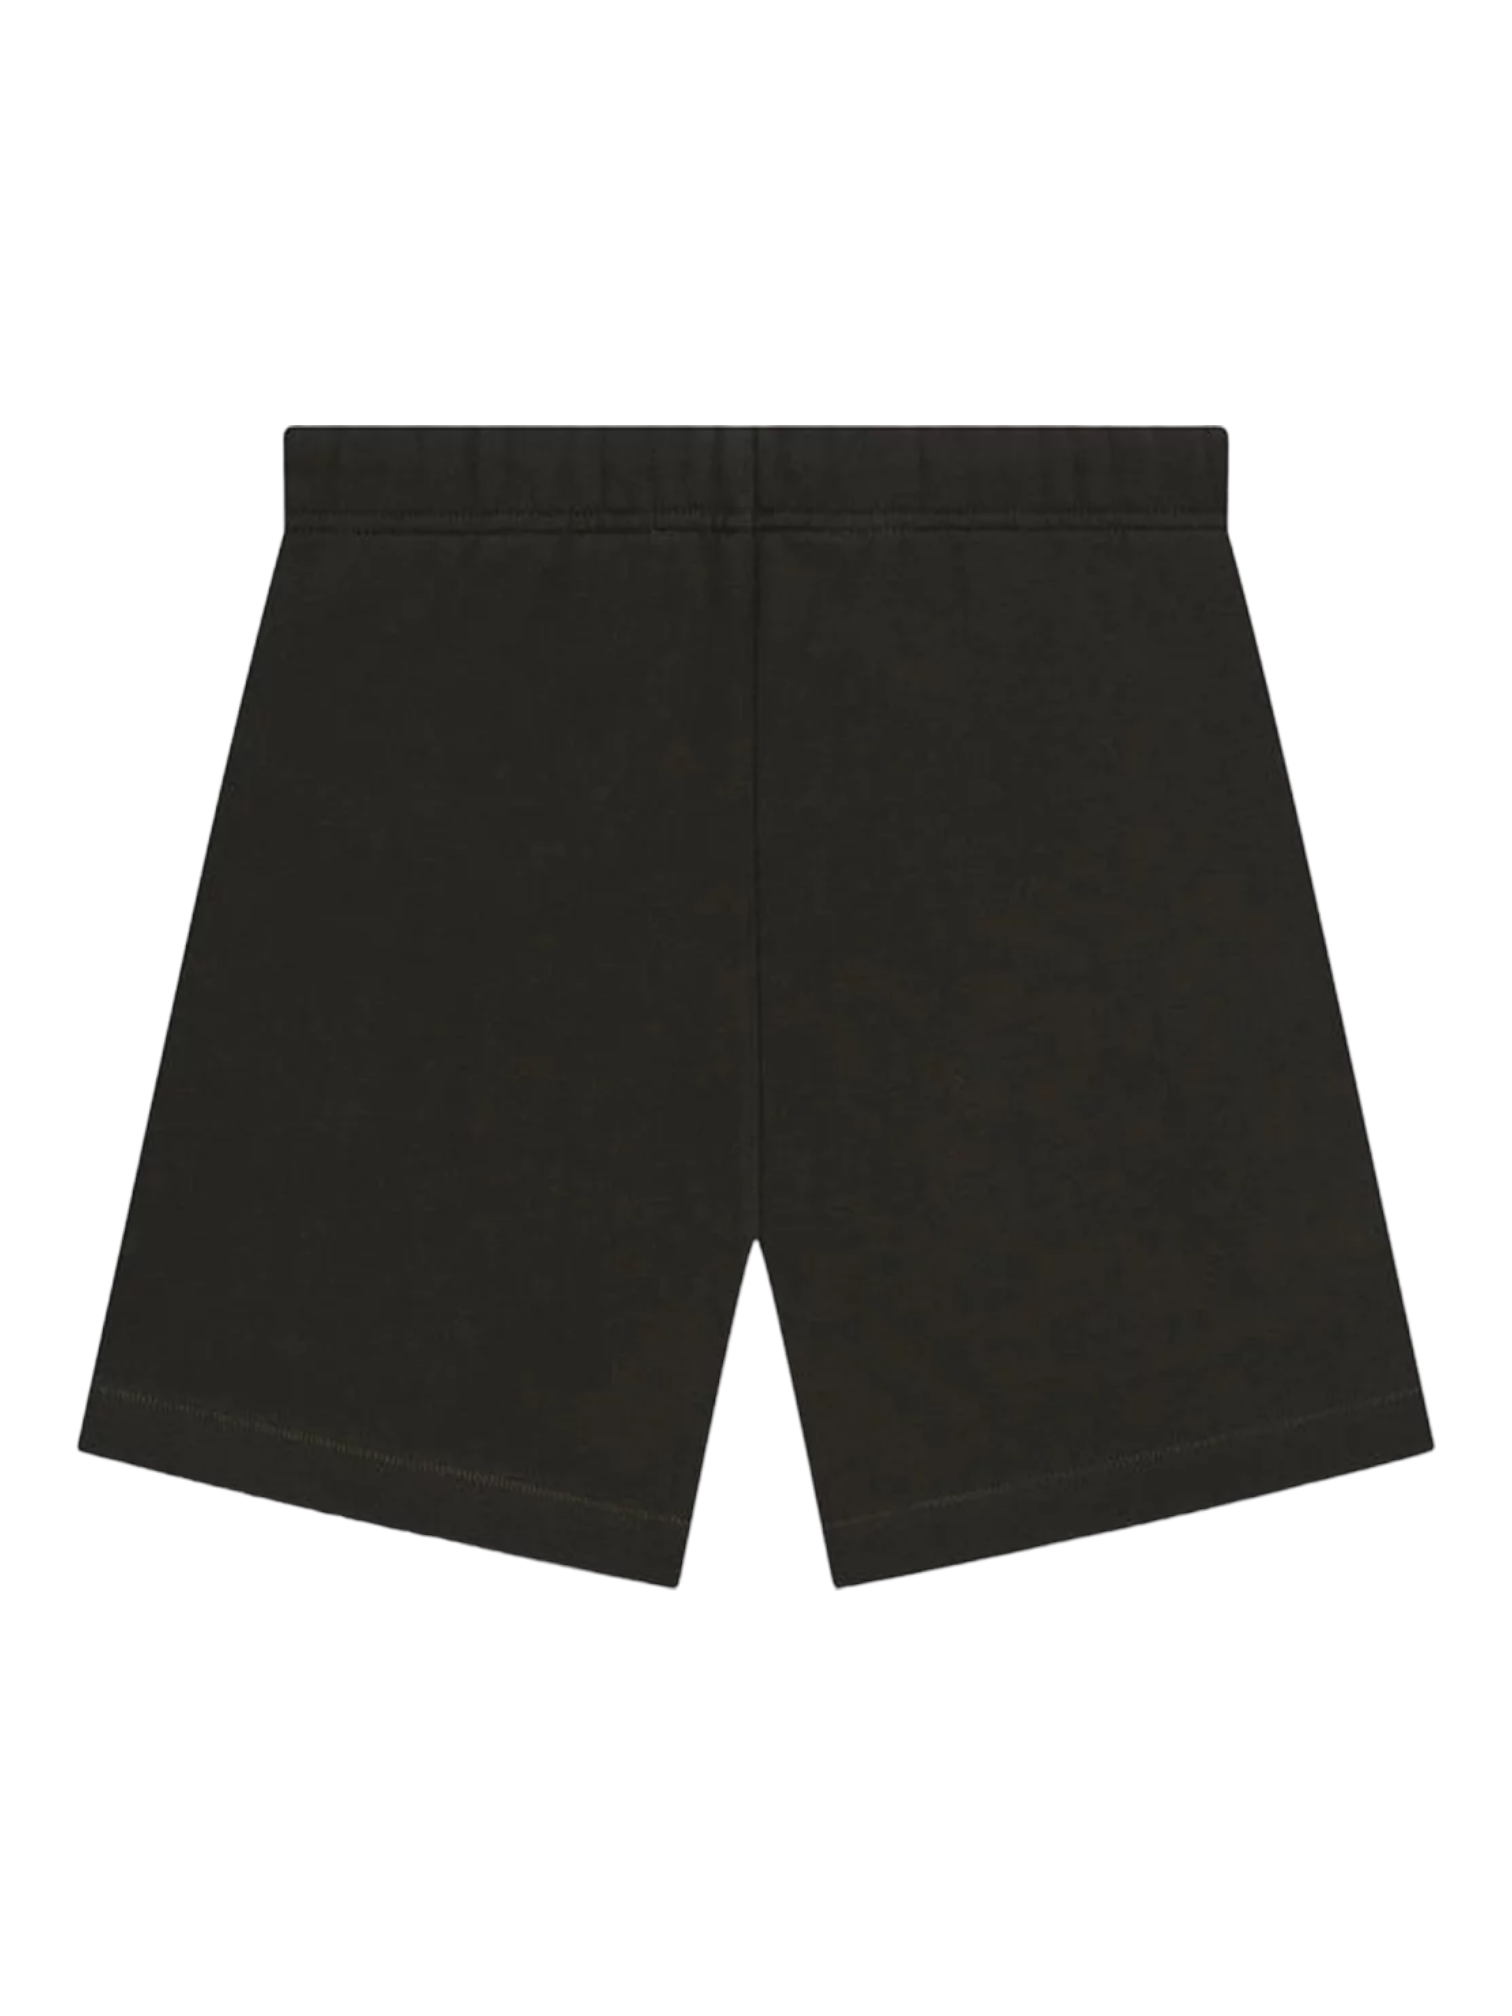 Essentials Fear of God Off Black Fleece Shorts SS23 — Genuine Design Luxury Consignment Calgary, Alberta, Canada New and Pre-Owned Clothing, Shoes, Accessories.